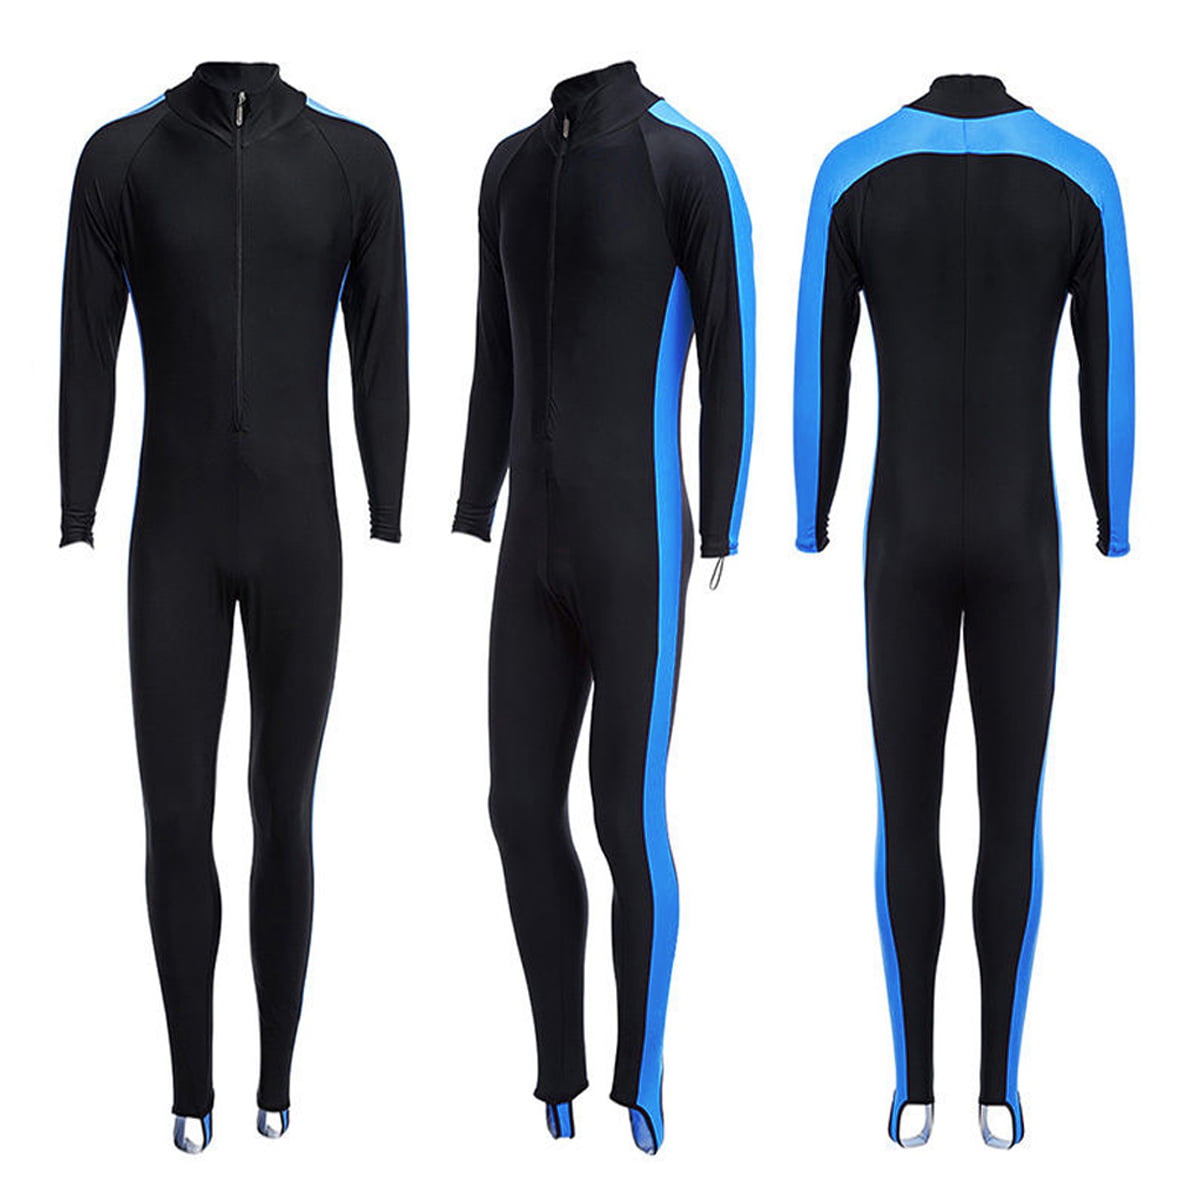 Ultra-thin WetSuit Full Body Super stretch Diving Suit Swim Surf Snorkeling GER 